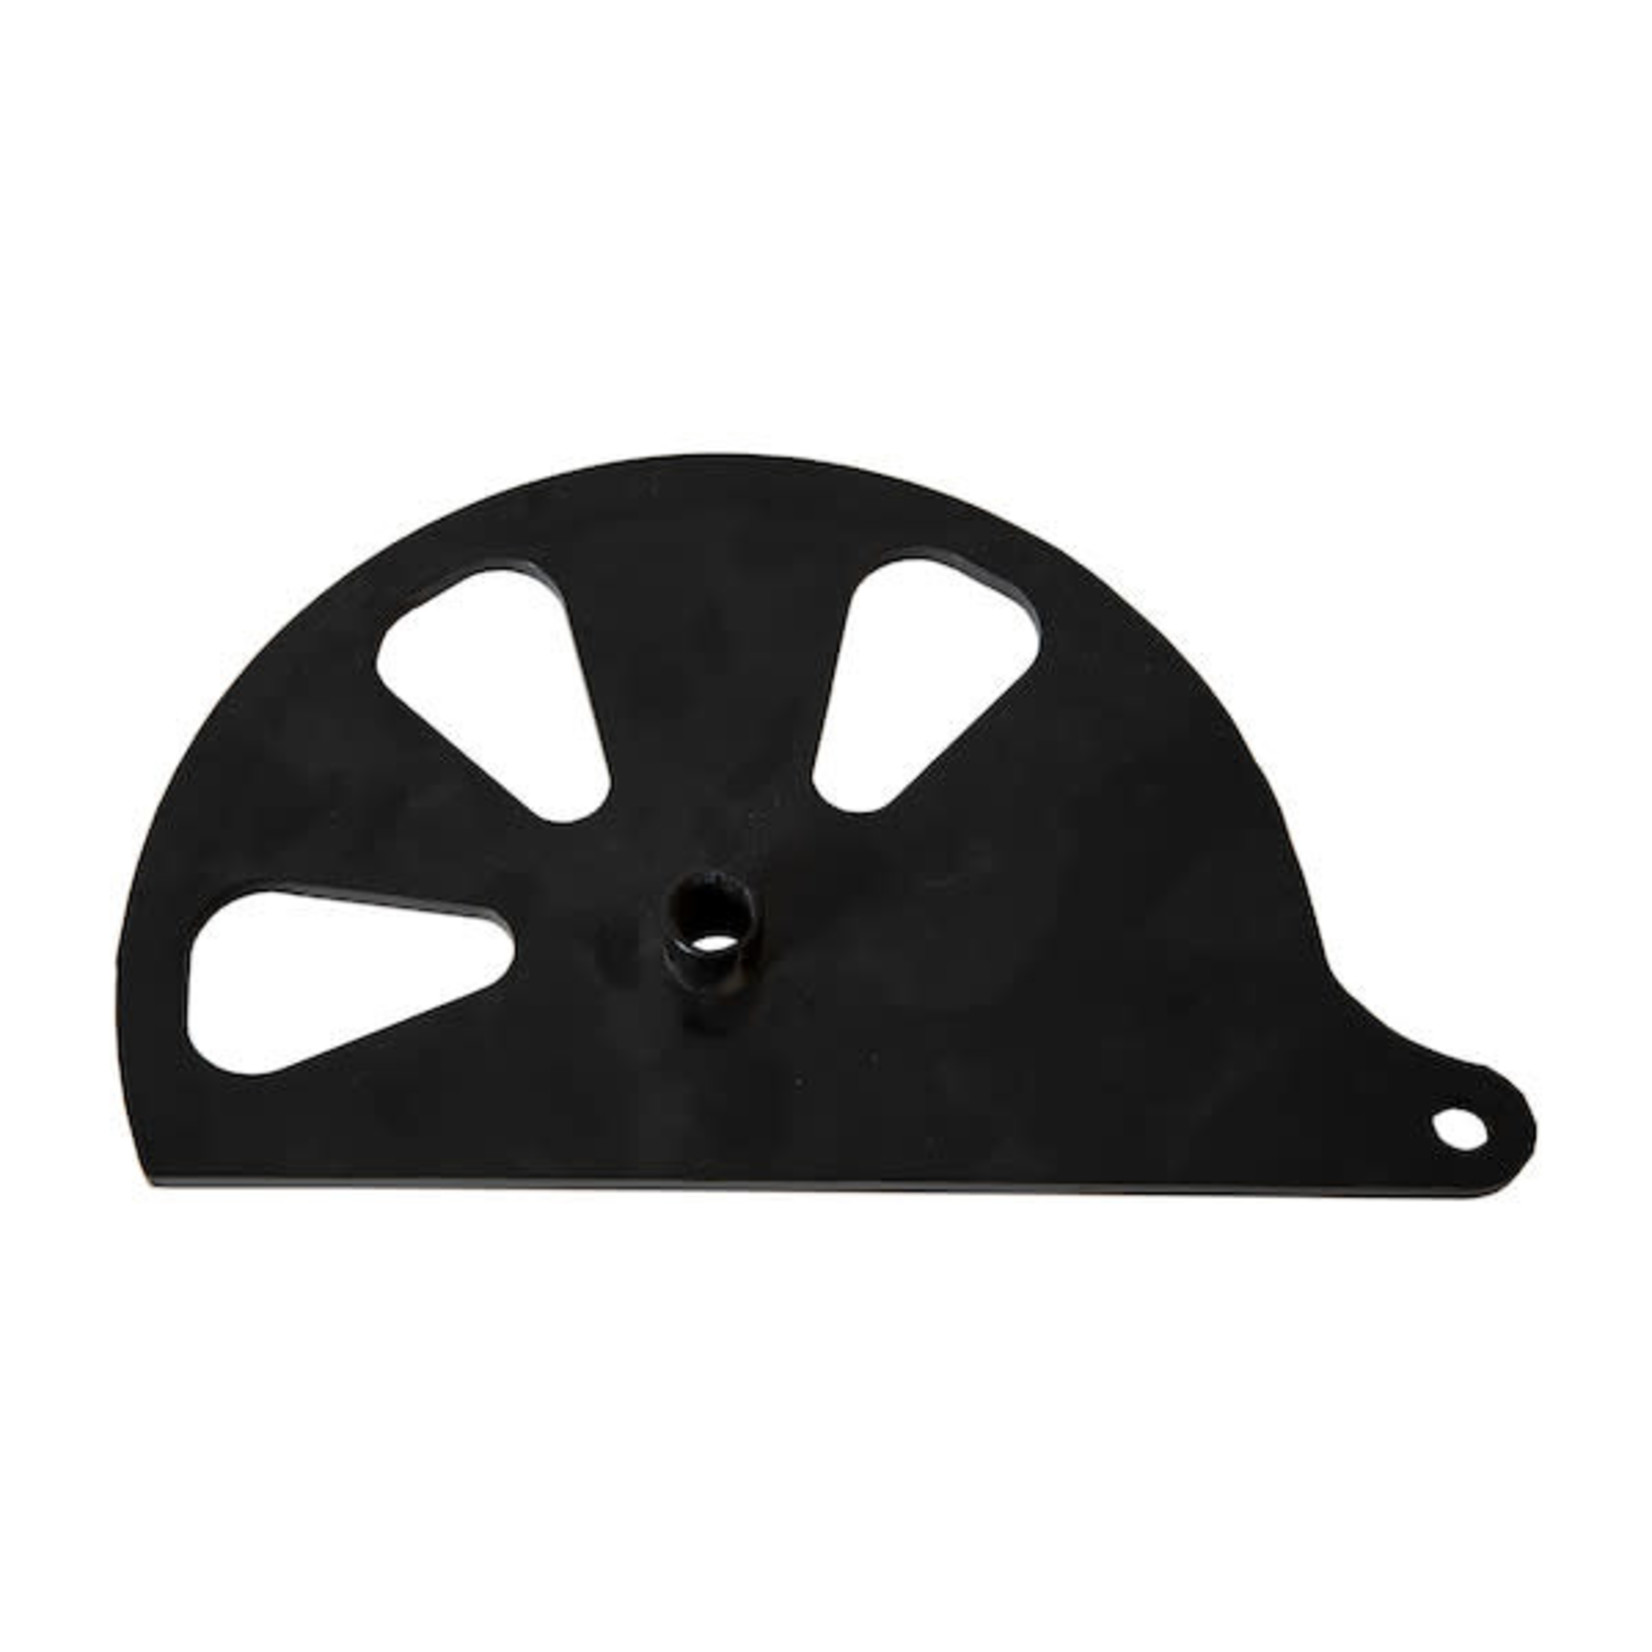 SaltDogg Replacement Restrictor Plate Assembly for Walk Behind Spreaders